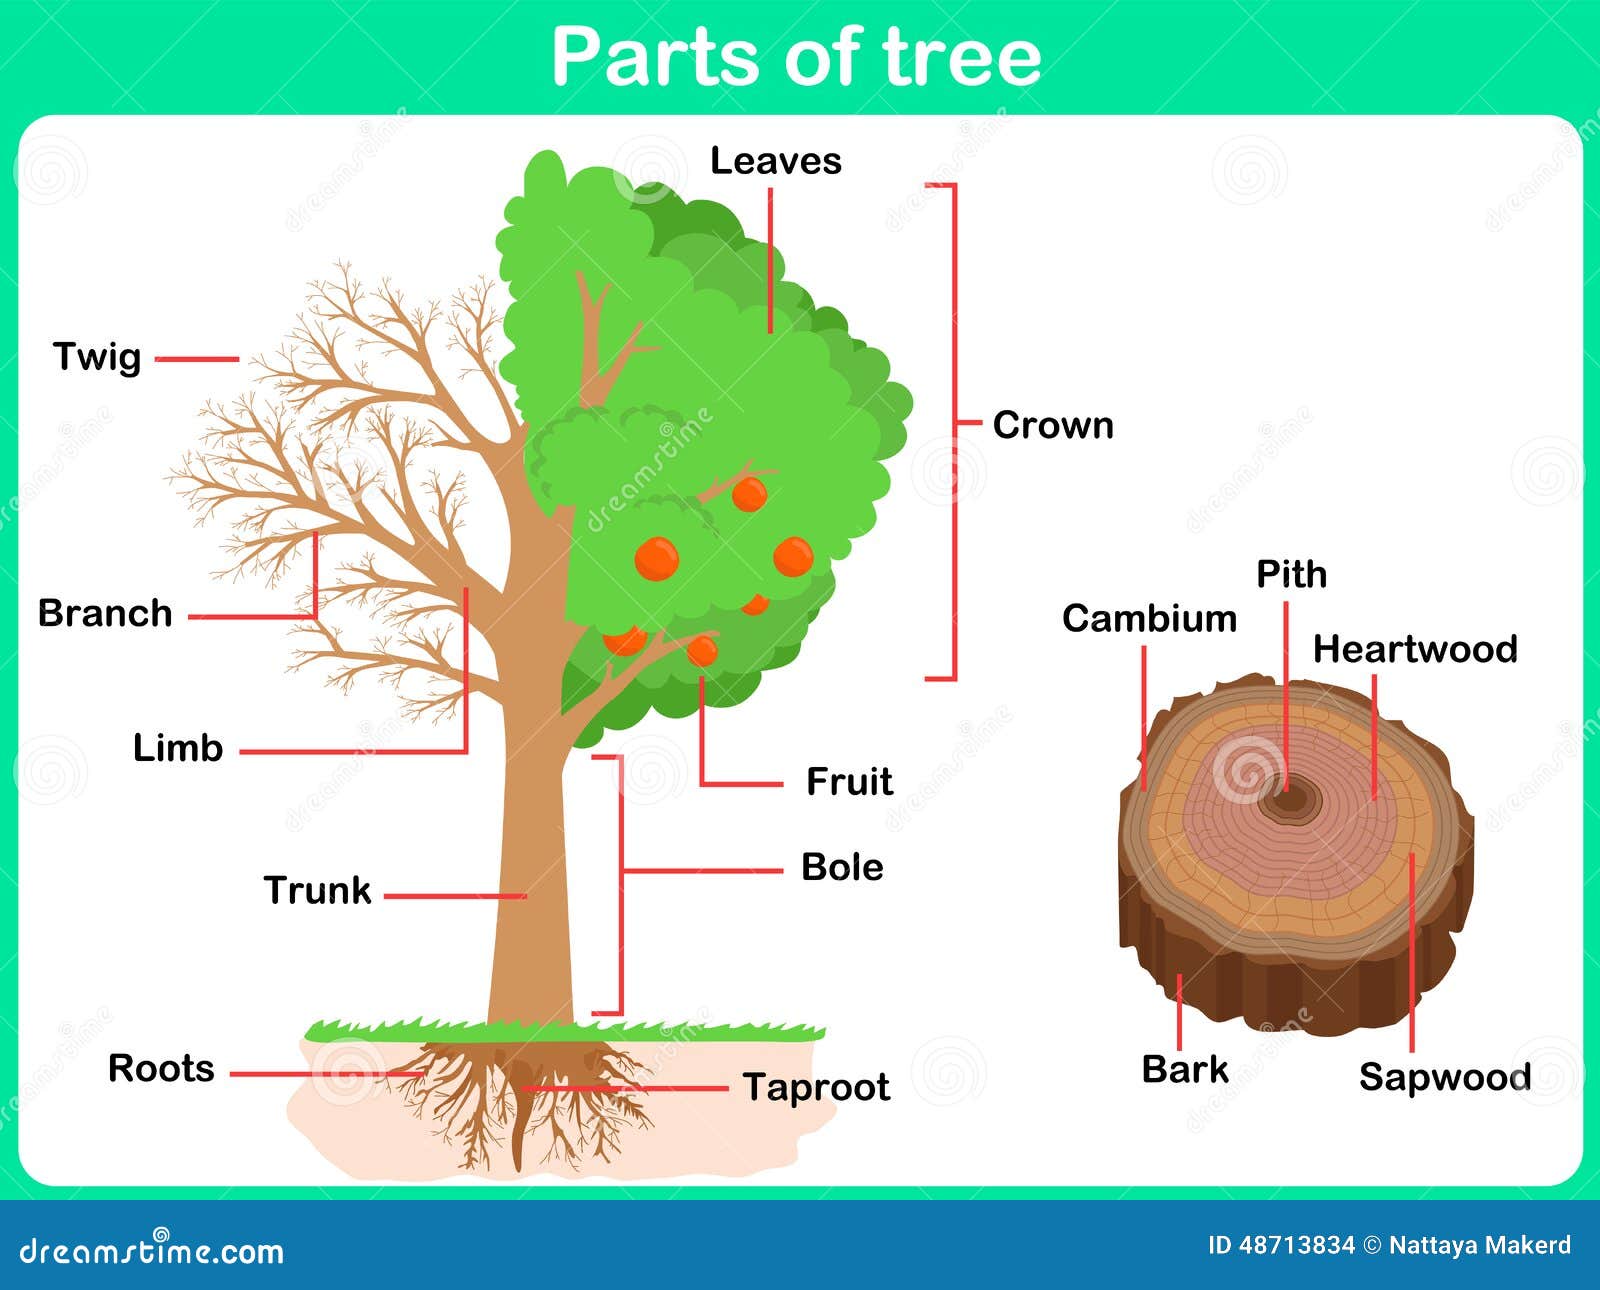 leaning parts of tree for kids